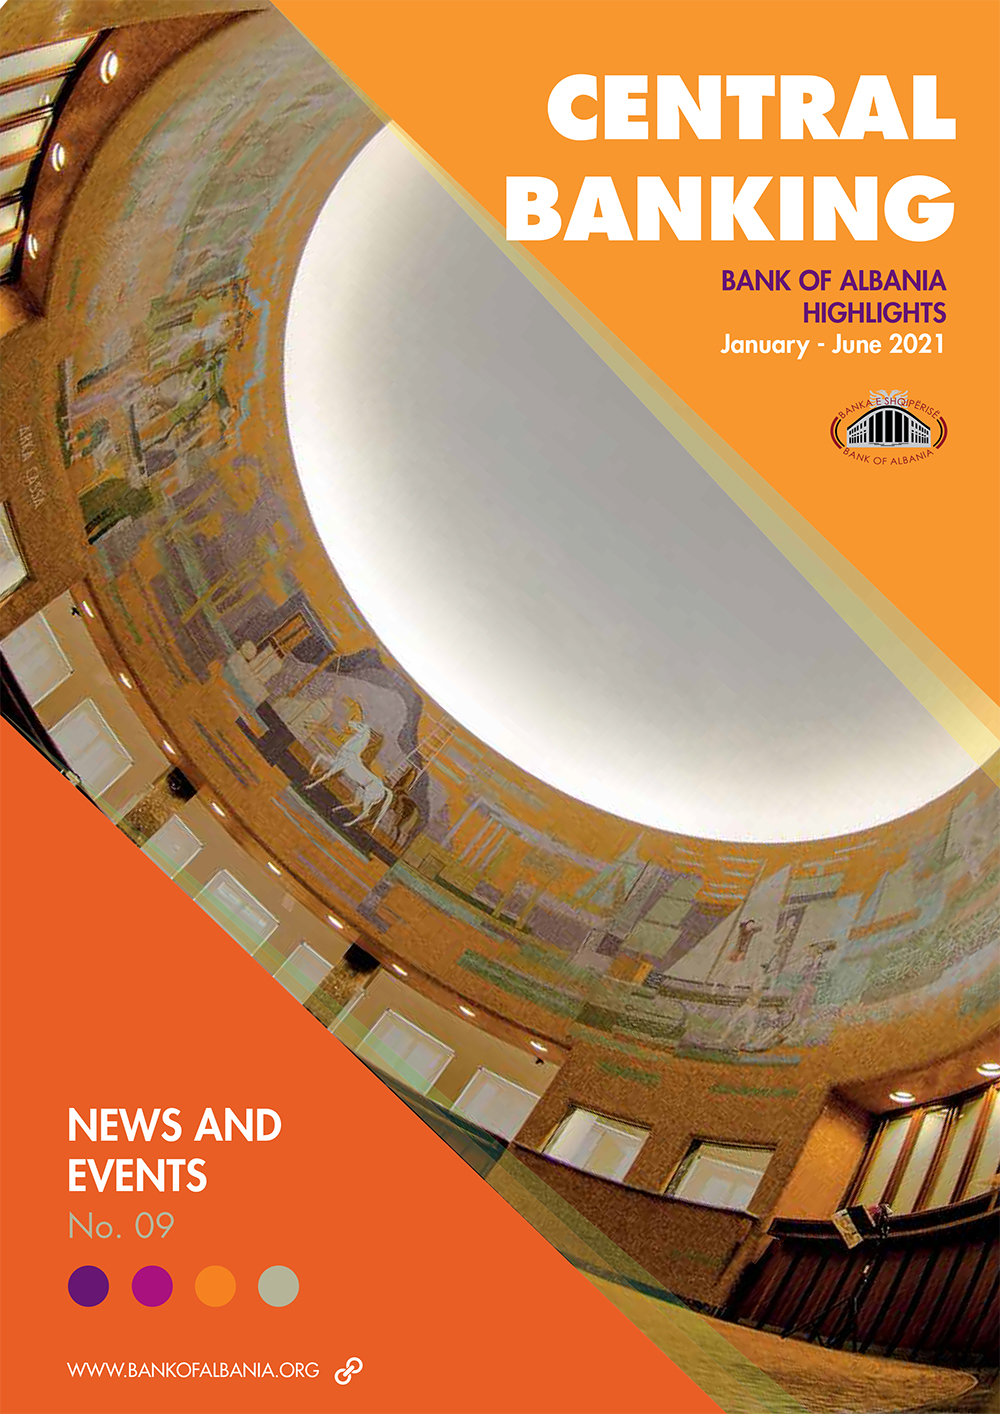 Central Banking magazine, January - June 2021